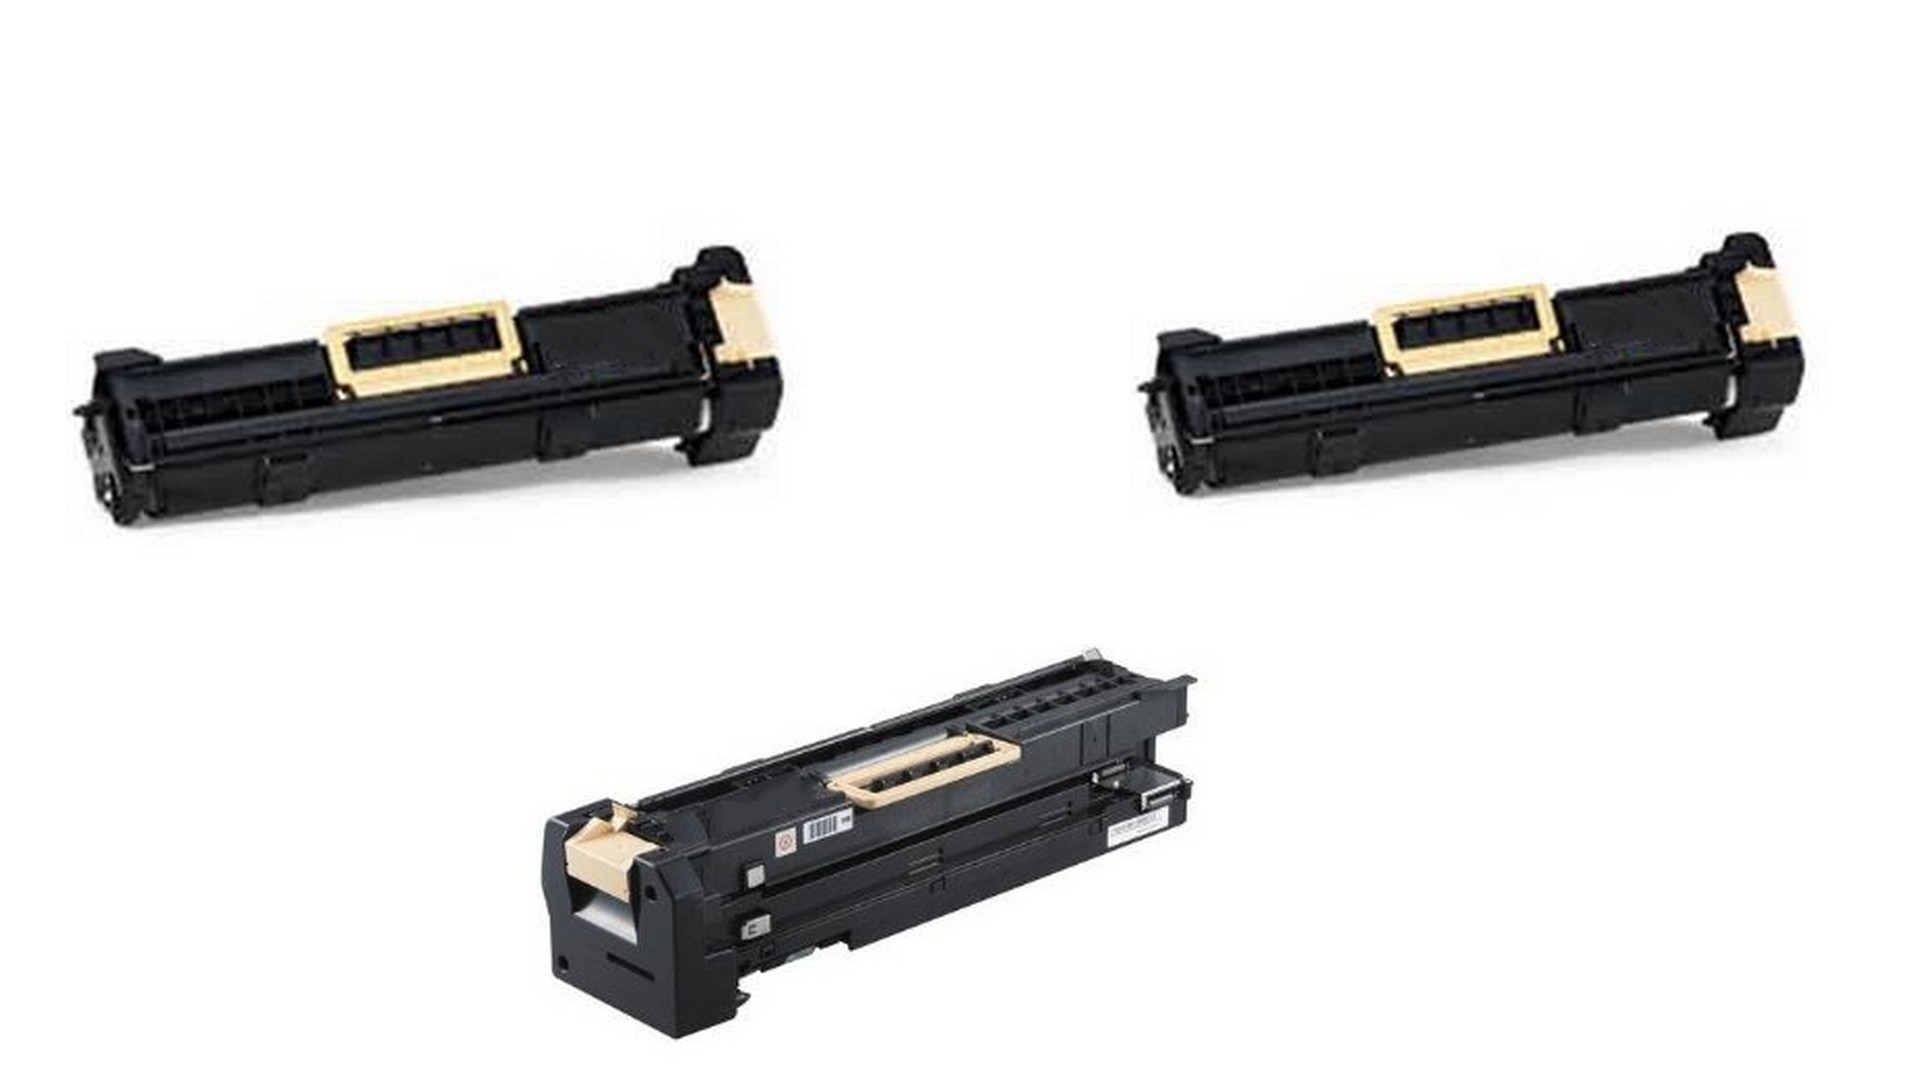 Compatible Xerox Phaser 5500 Toner/Drum Value Combo Pack (2 Toners/1-Drum) (2-113R00668/1-113R00670VP)